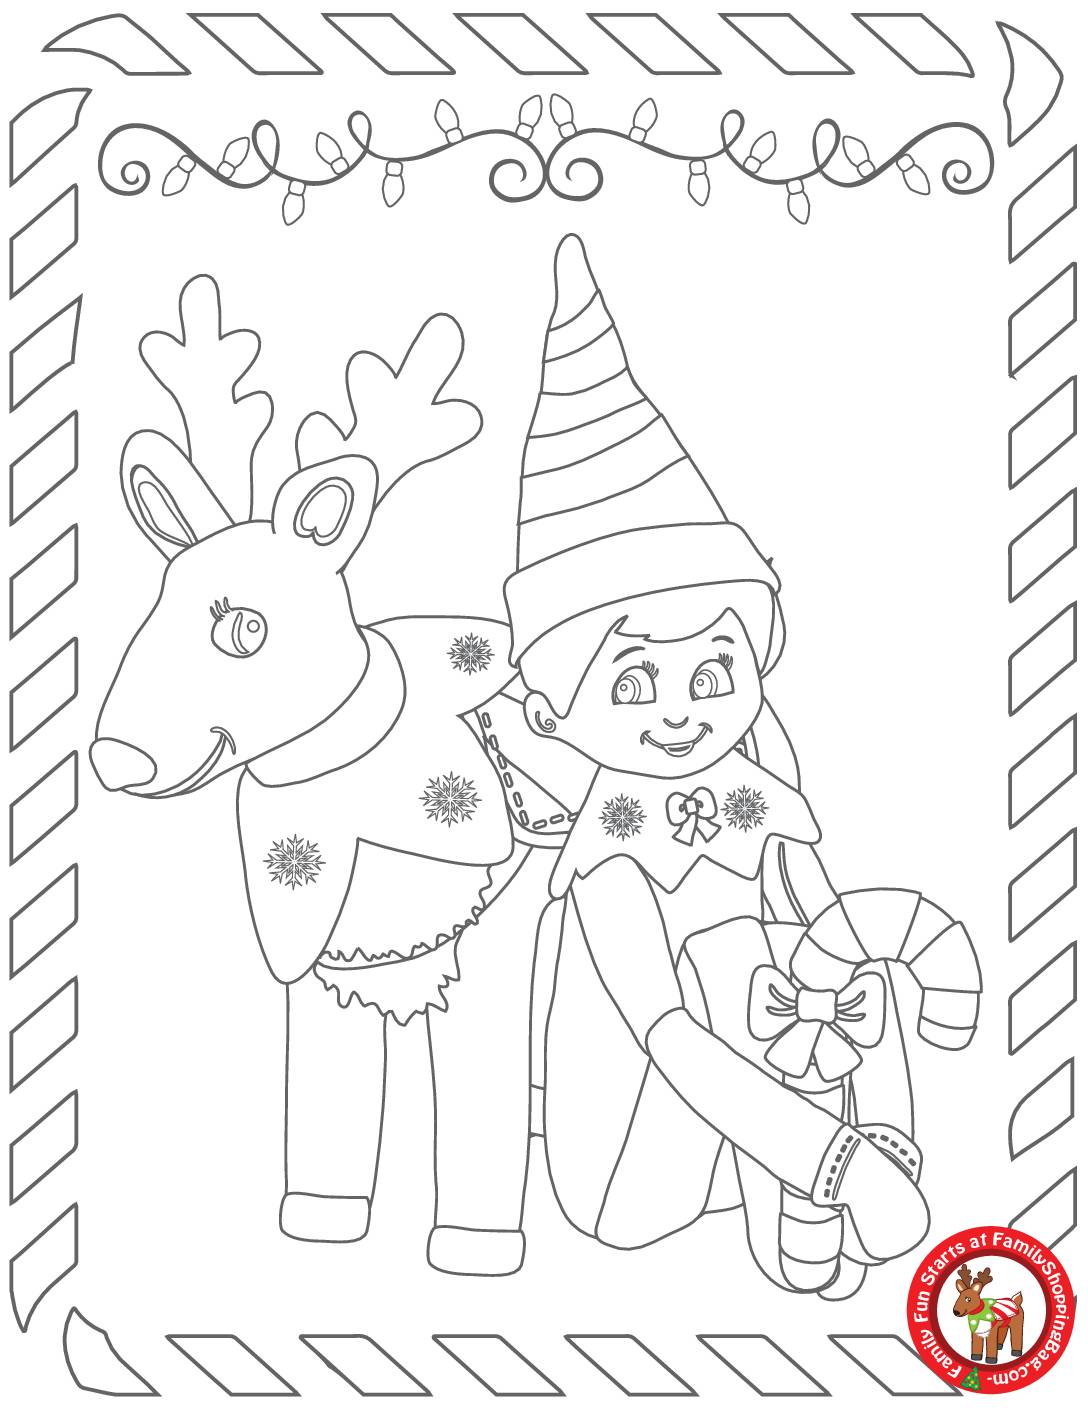 Elf coloring page 2 Coloring Pages